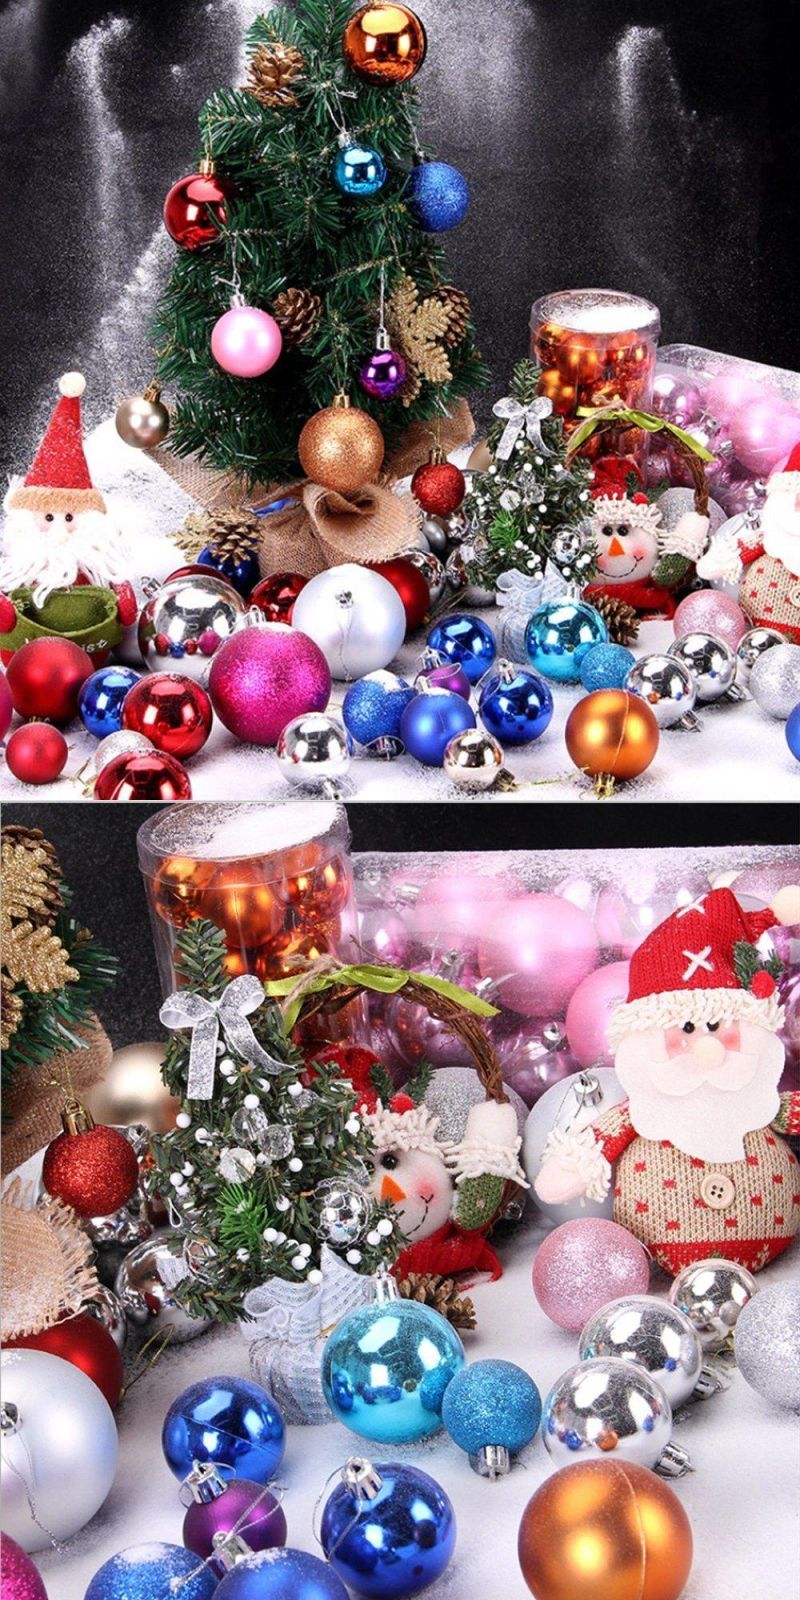 New Party Decoration Christmas Personlized Gift Christmas Ball